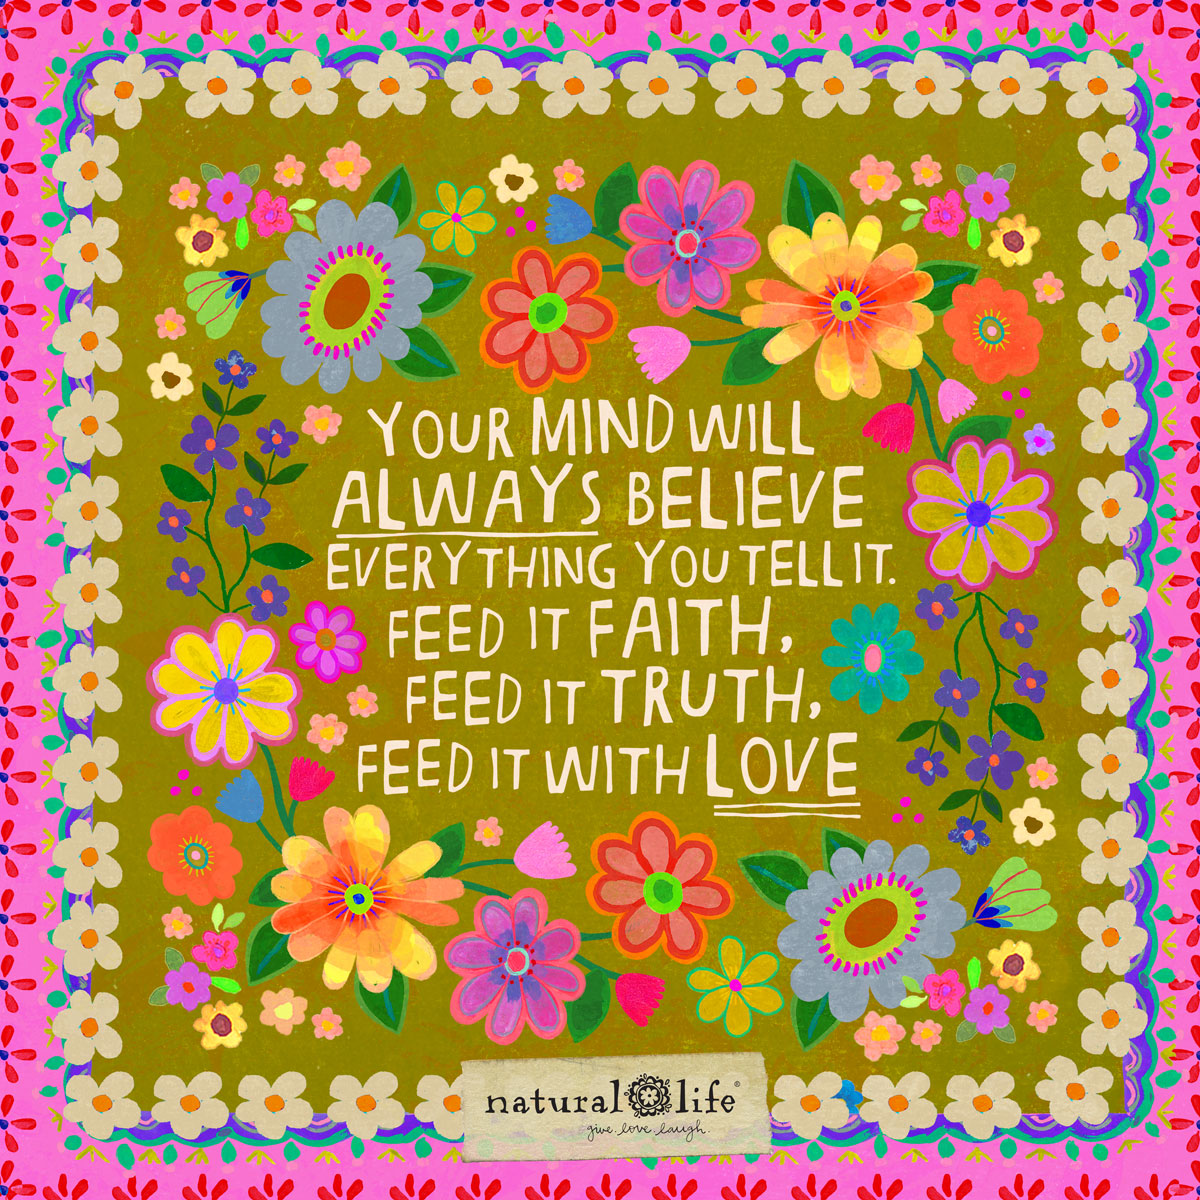 Your mind will ALWAYS believe everything you tell it. 
Feed it faith,
Feed it truth,
Feed it with love. ~ #Mindfulness